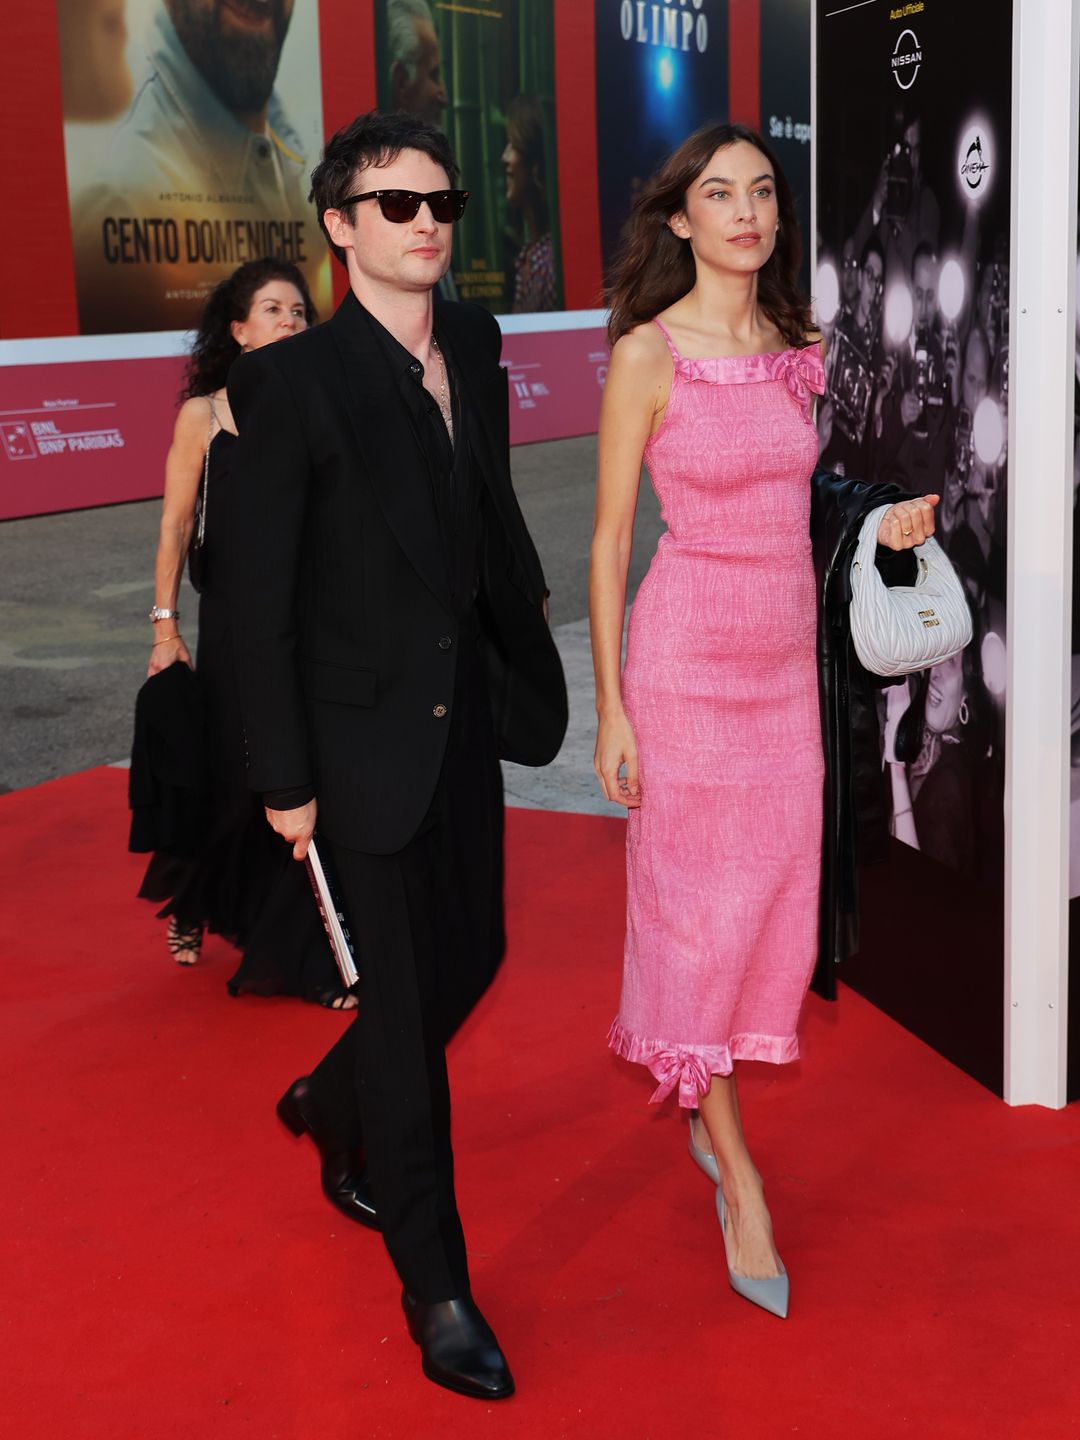 ROME, ITALY - OCTOBER 19: Tom Sturridge and Alexa Chung  attend a red carpet for the movie "Widow Clicquot" during the 18th Rome Film Festival at Auditorium Parco Della Musica on October 19, 2023 in Rome, Italy. (Photo by Ernesto Ruscio/Getty Images)